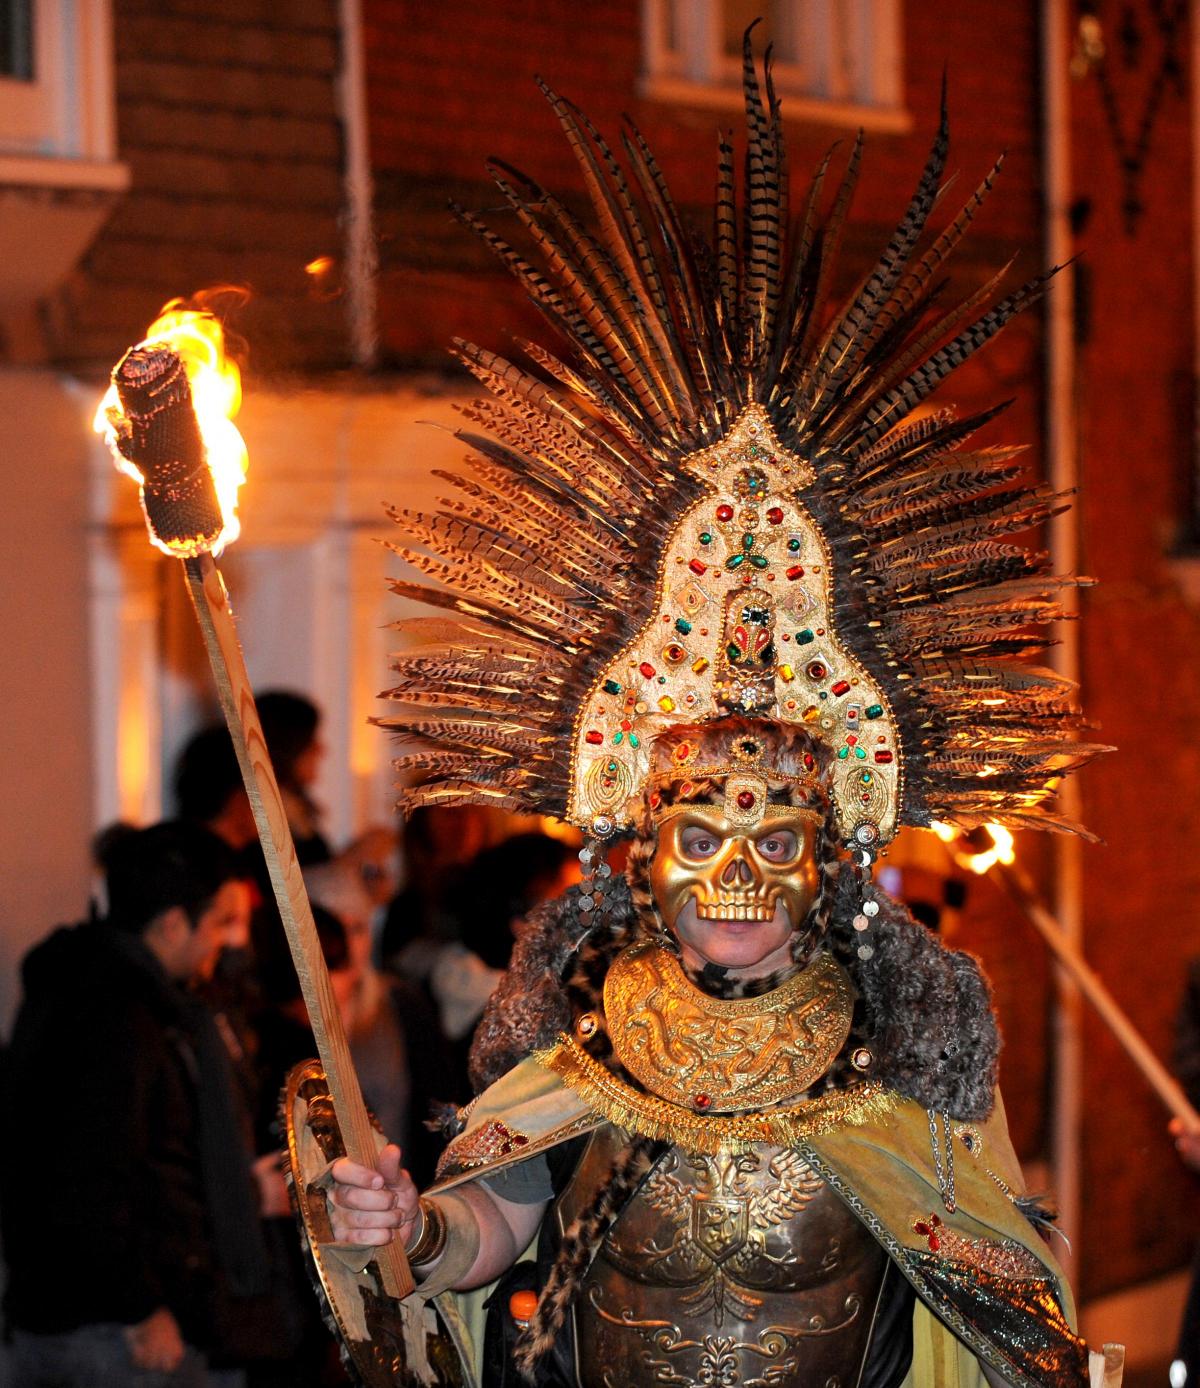 All the fun and spectacle of Lewes Bonfire 2013.